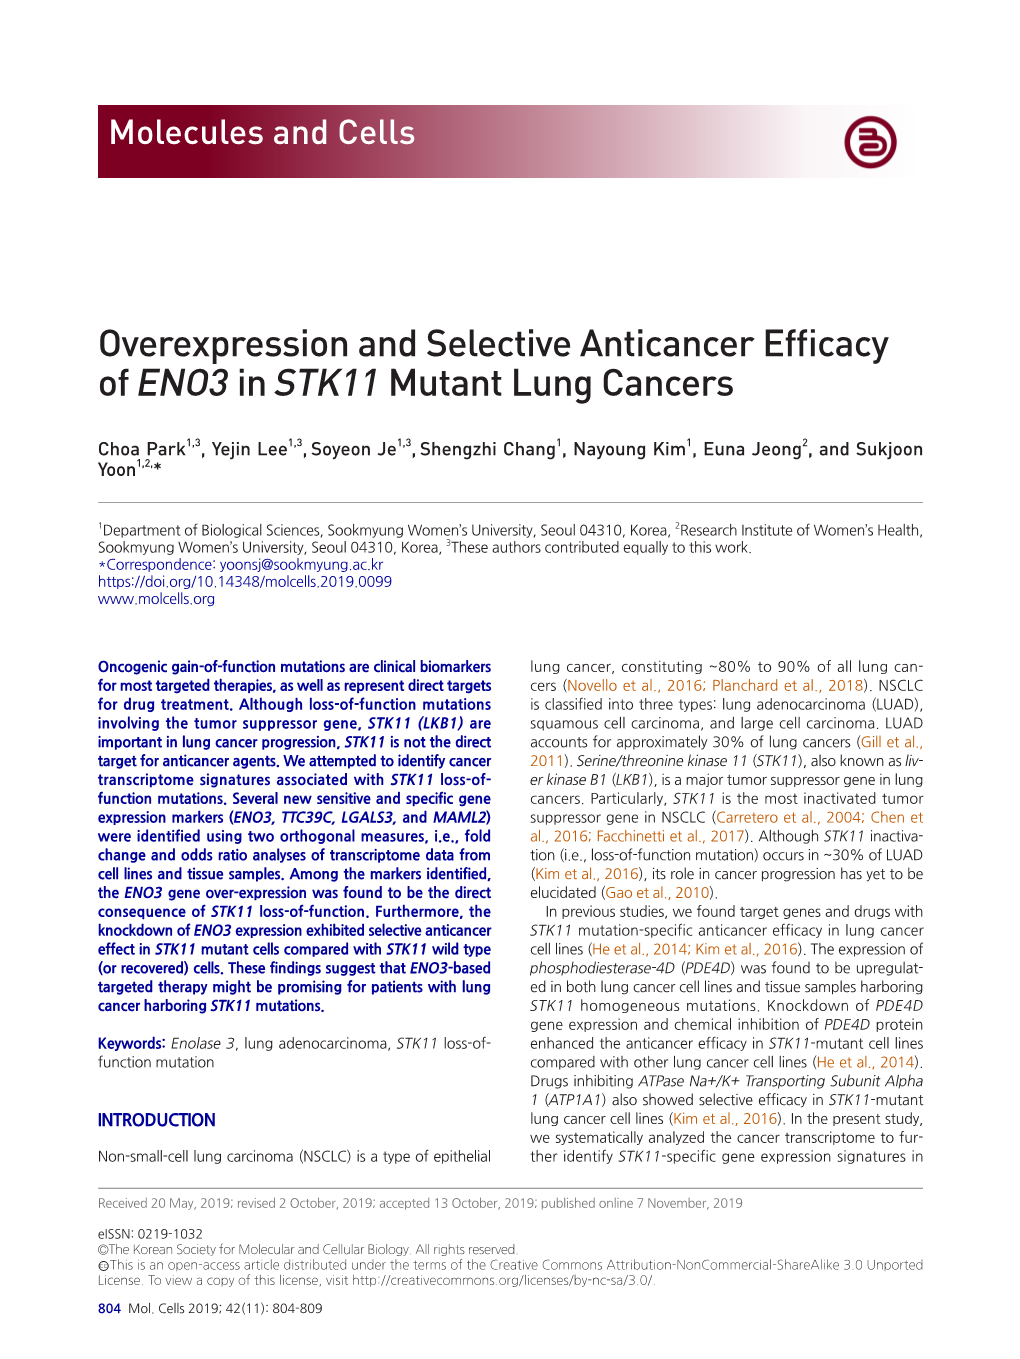 Overexpression and Selective Anticancer Efficacy of ENO3 in STK11 Mutant Lung Cancers